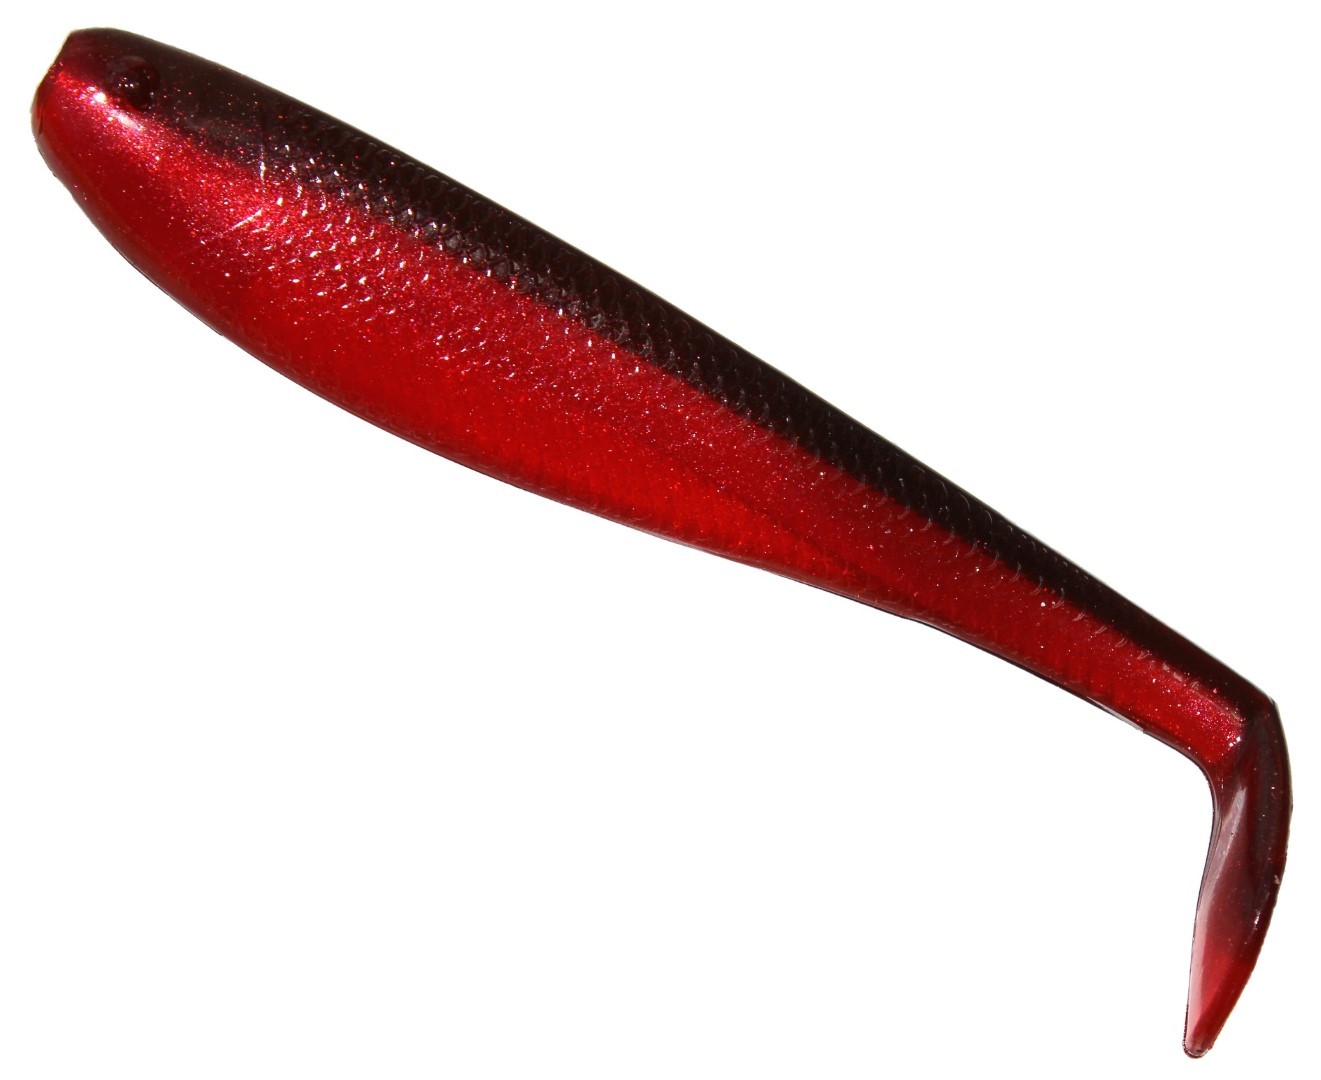 Zman 4 Inch SwimmerZ Soft Plastic Lures - 4 Pack of Z Man Soft Plastic Lures